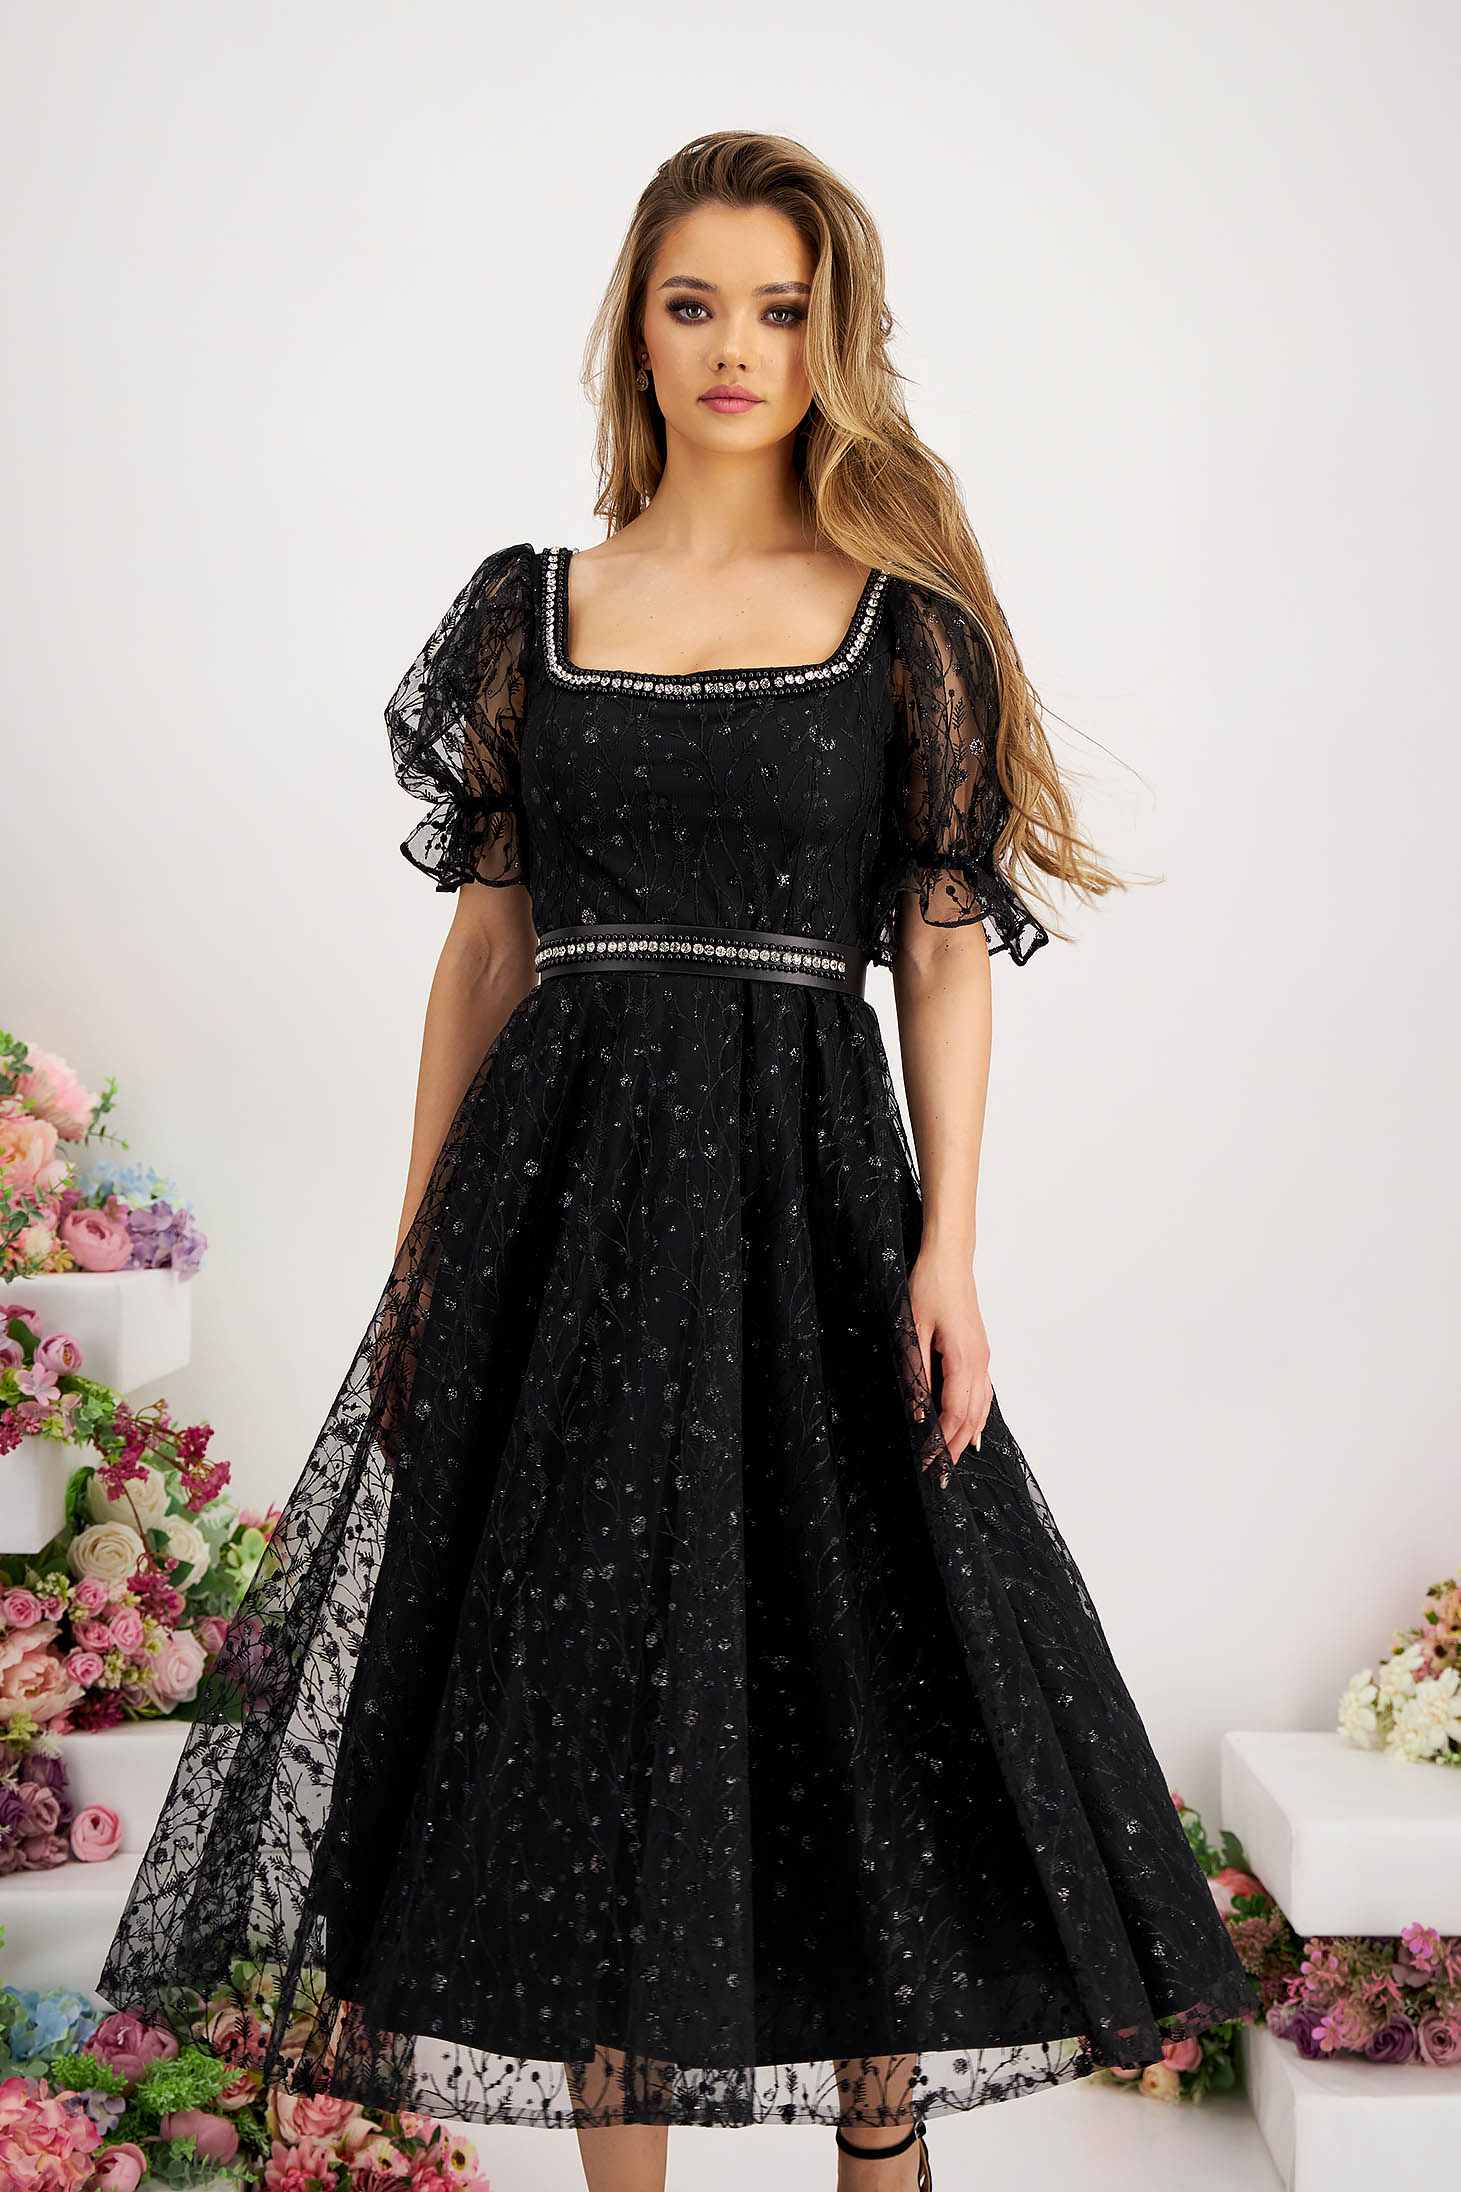 Black dress from tulle with glitter details midi cloche accessorized with belt